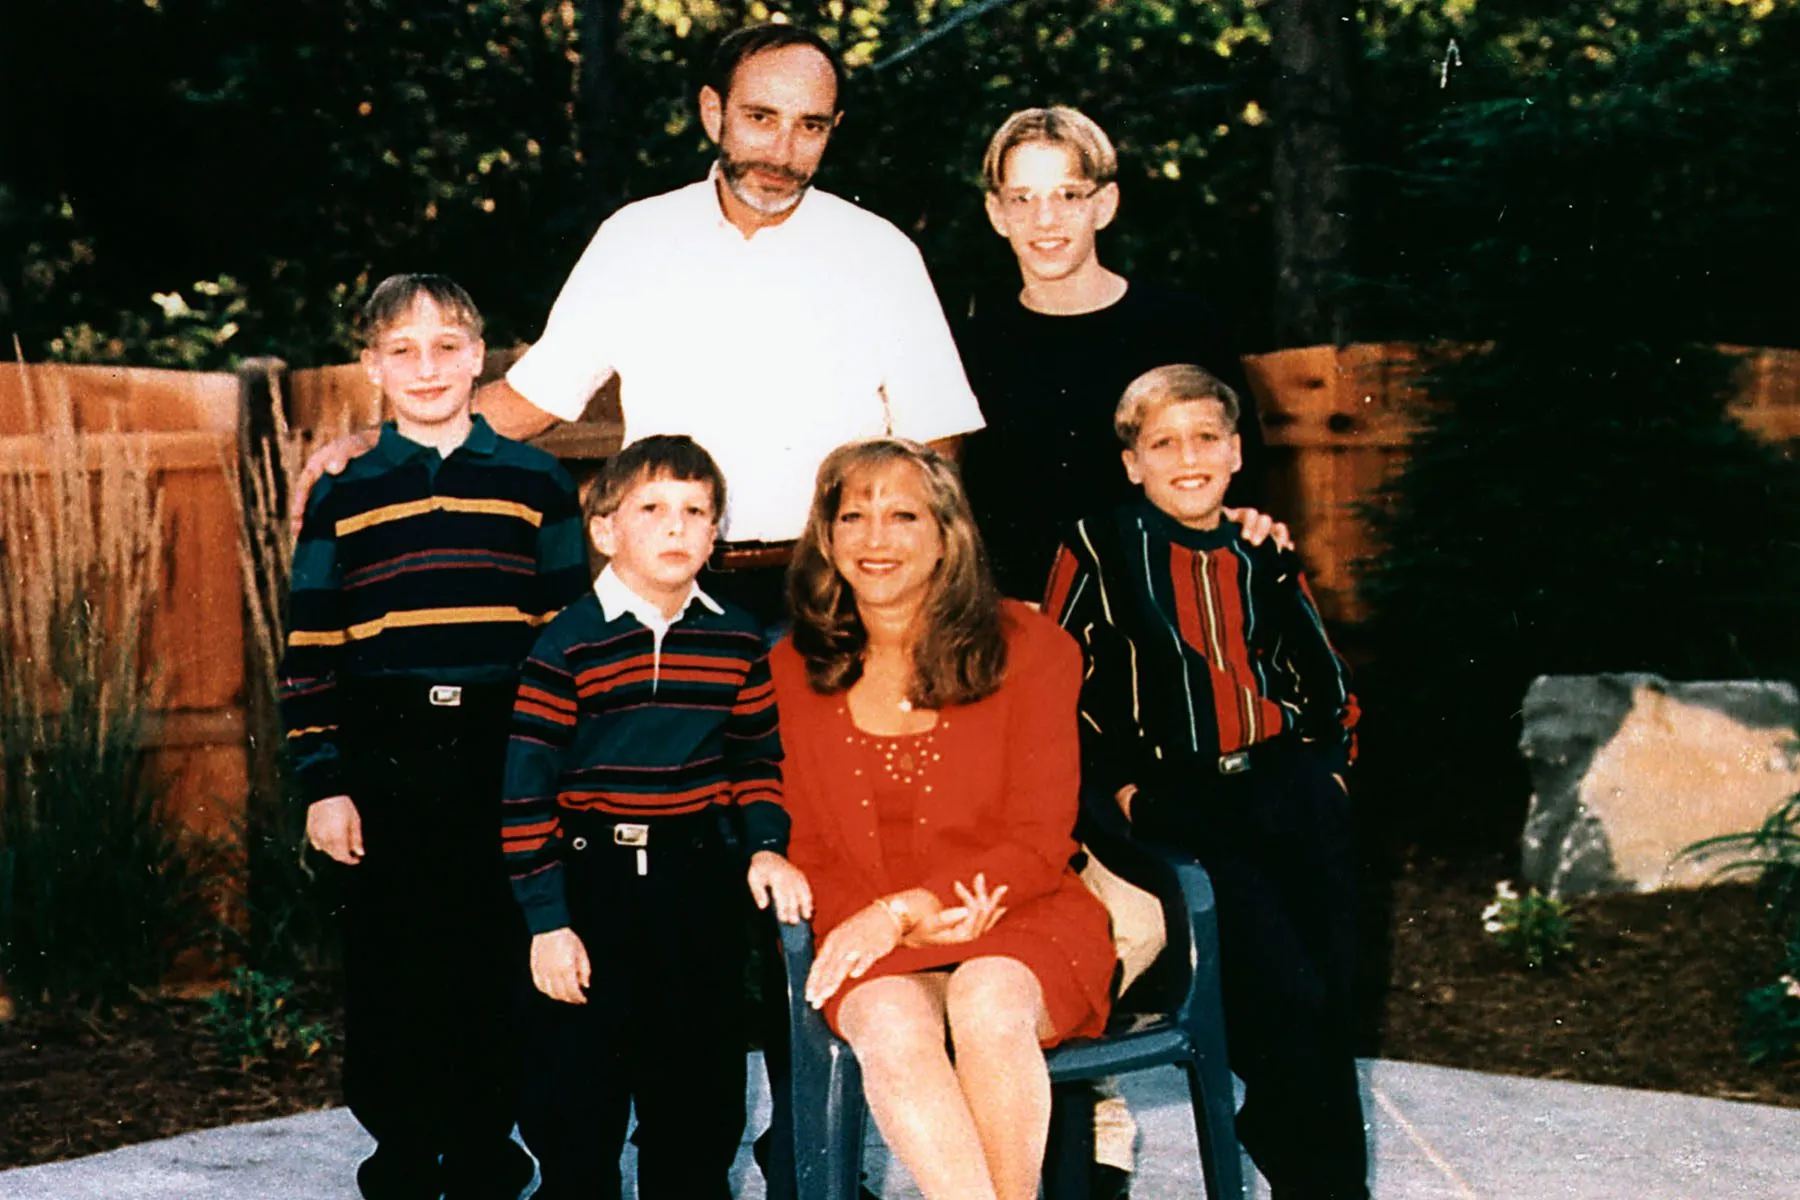 A family photo shows the Slepian family in their backyard.